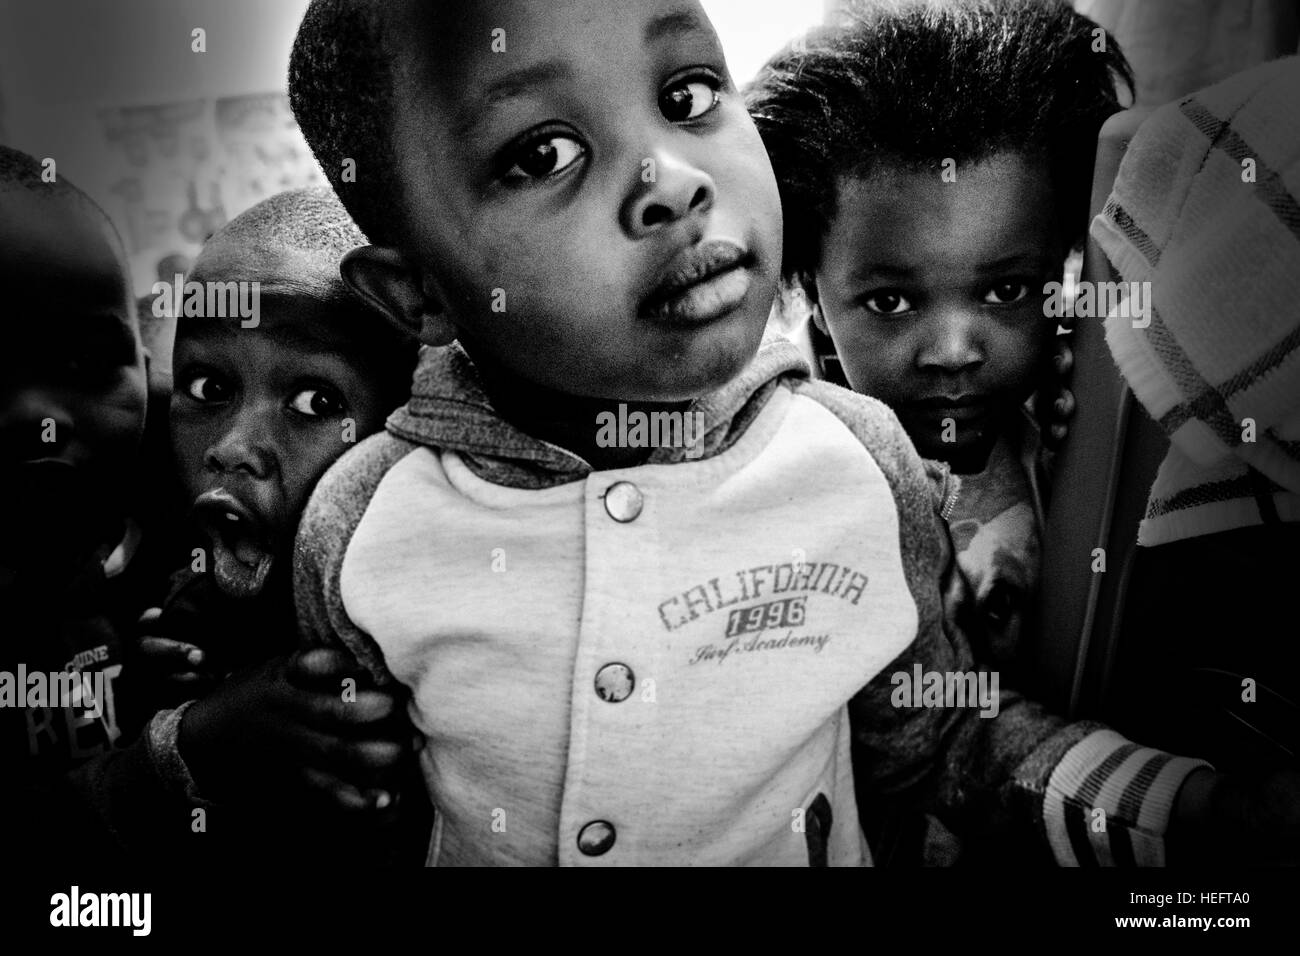 Children pose for a photo in a school in a township in Cape Town. The school is supported bu the Uthando community project, which works across a number of townships in the city. Stock Photo